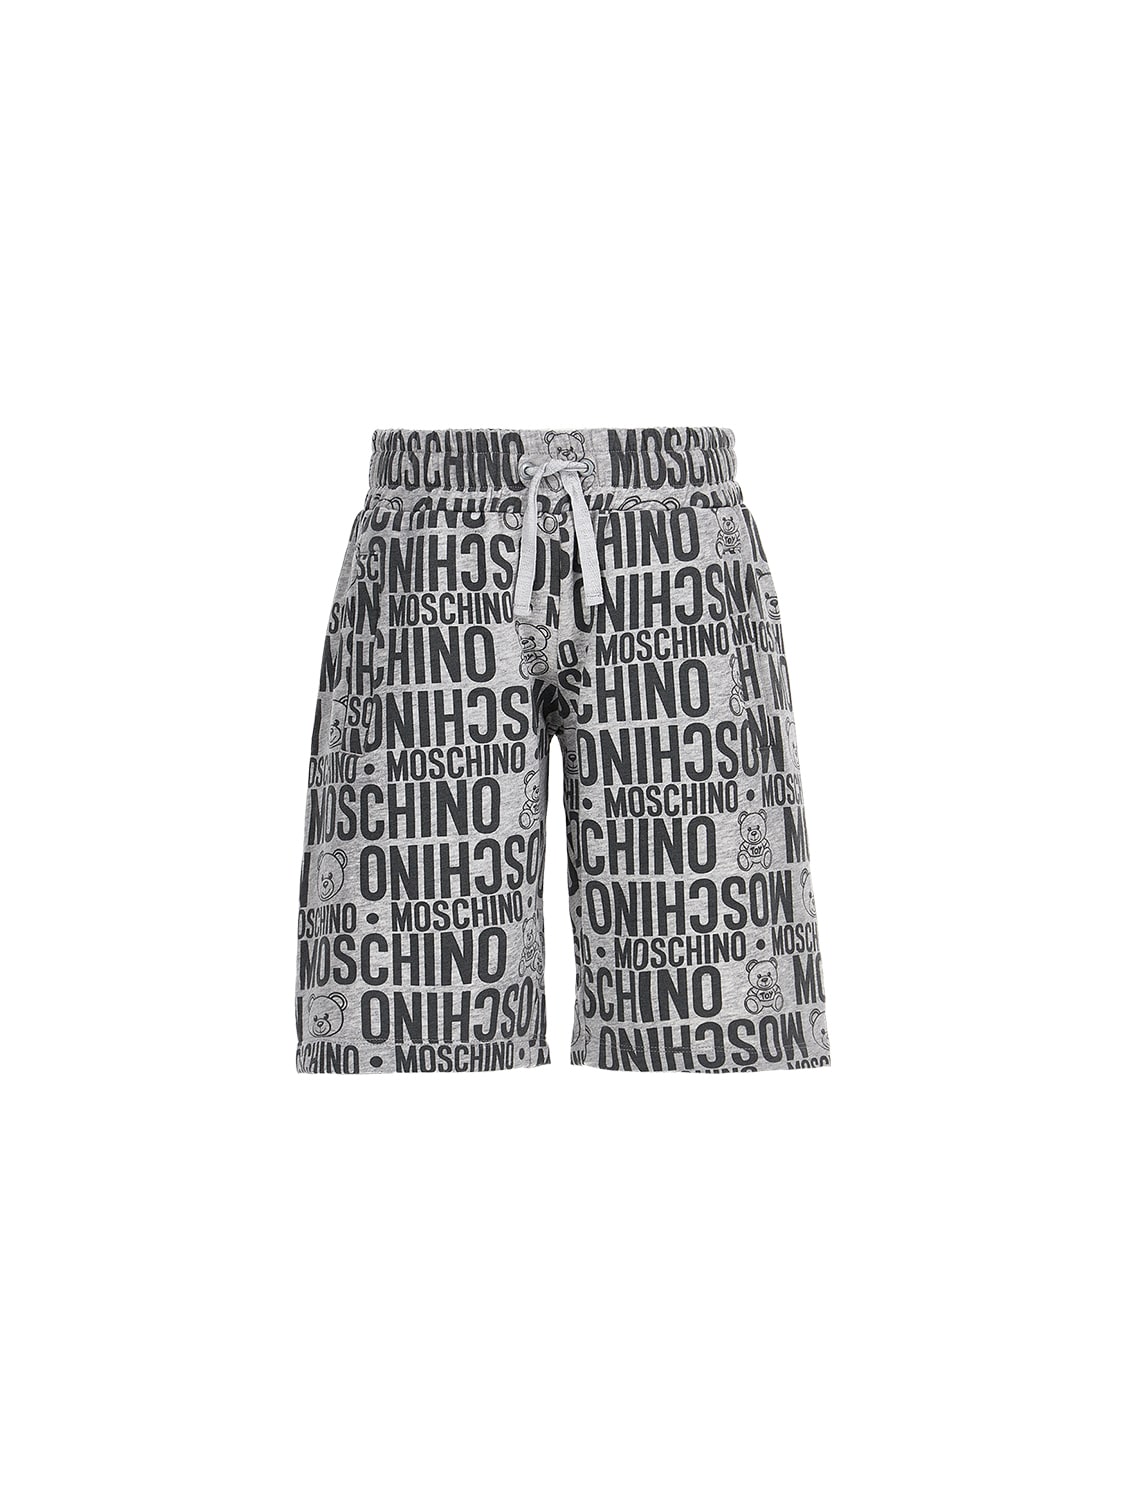 MOSCHINO ALL OVER PRINT COTTON SWEAT SHORTS,73I8ZK003-ODIXNJY1